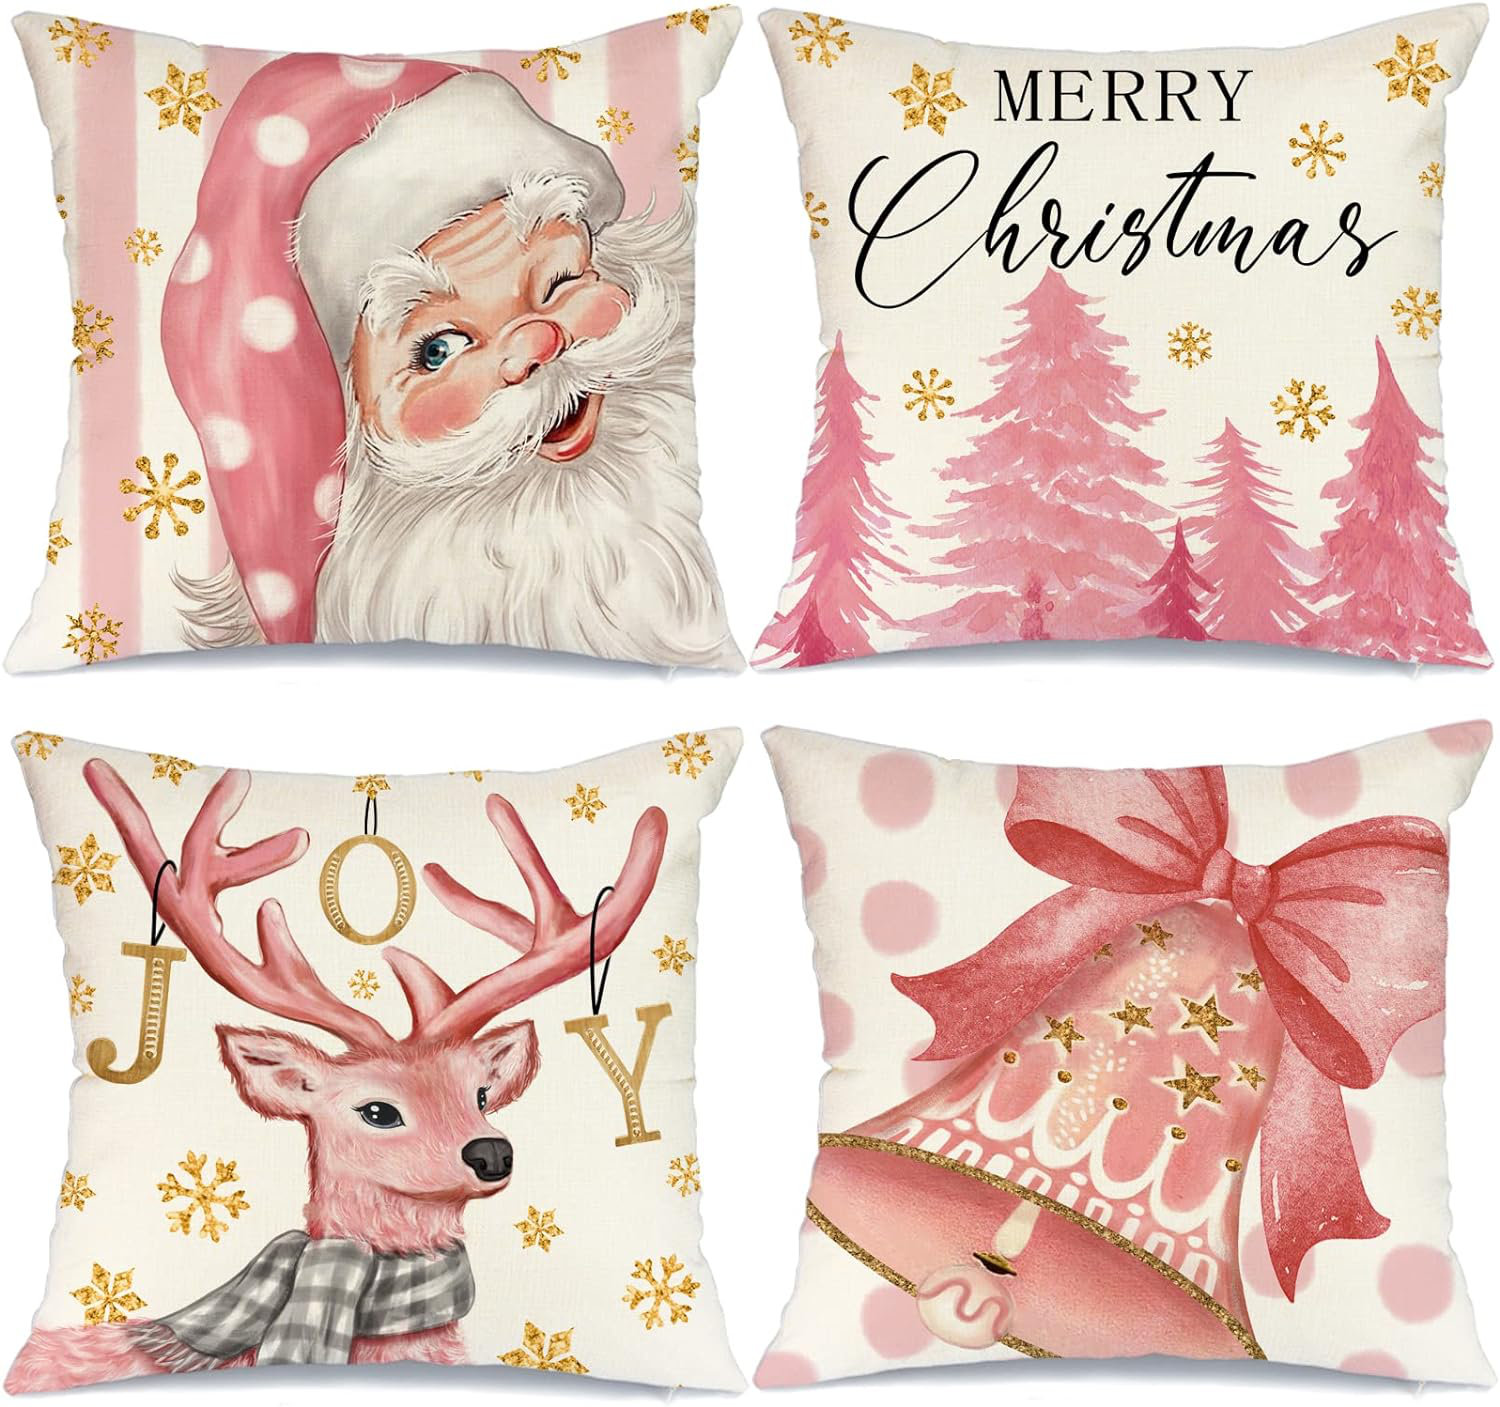 The Holiday Aisle® Christmas Pillow Covers 12X20 Set Of 4 For Christmas  Decorations Santa Claus Christmas Tree Reindeer Pink Bow Polka Dots Stripes  Christmas Pillows Throw Pillow Covers Christmas Farmhouse Decor